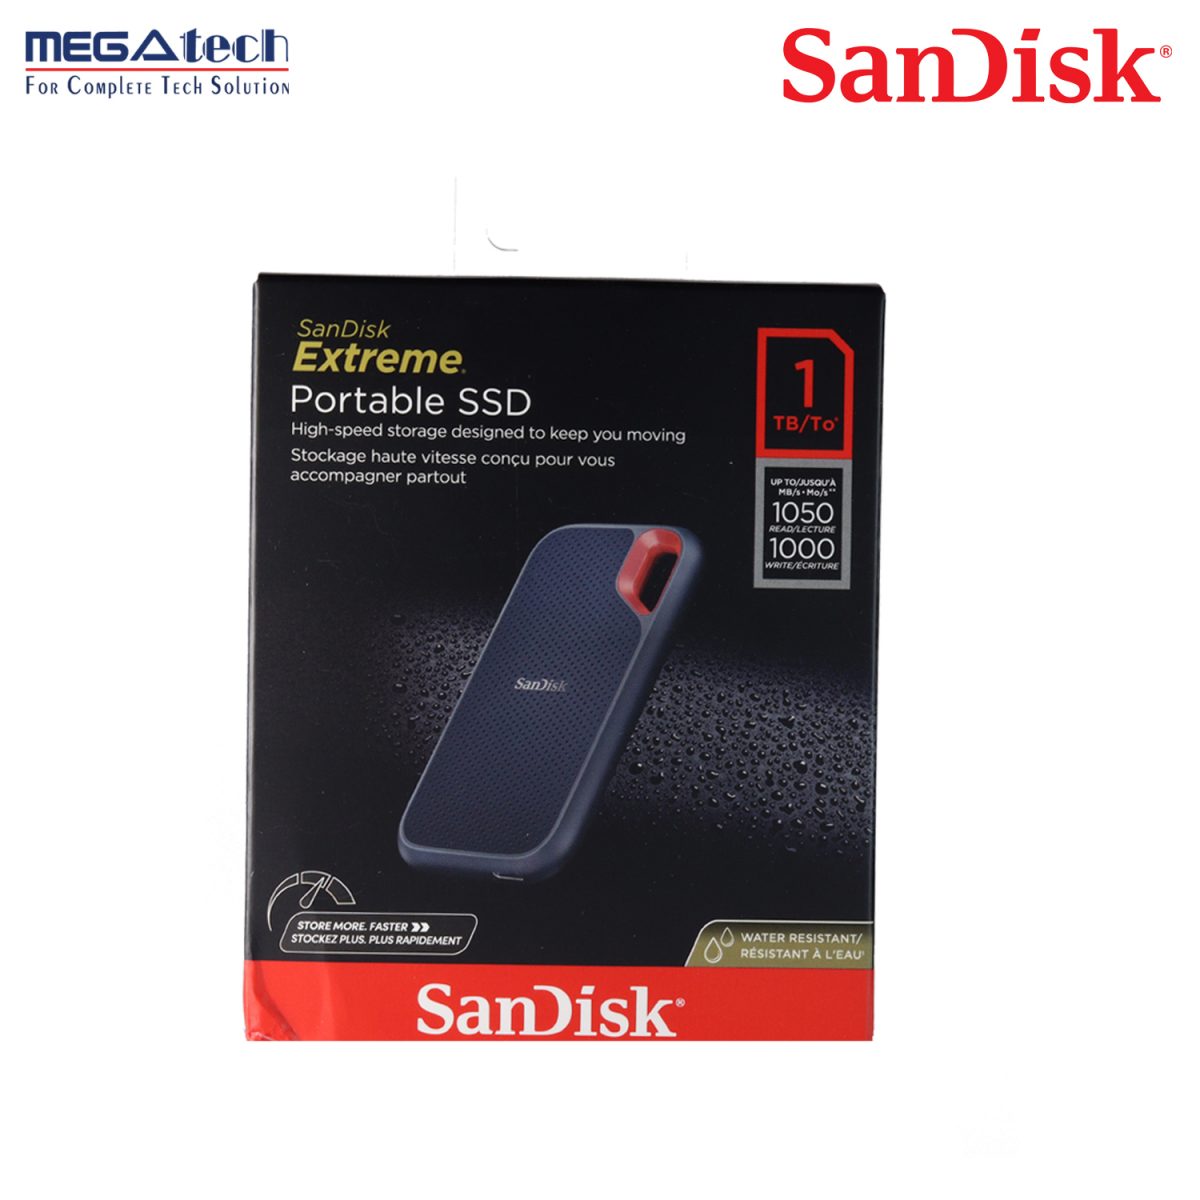 SanDisk Extreme Portable SSD 1 TB  520MB/s R, for PC & MAC, Color Black